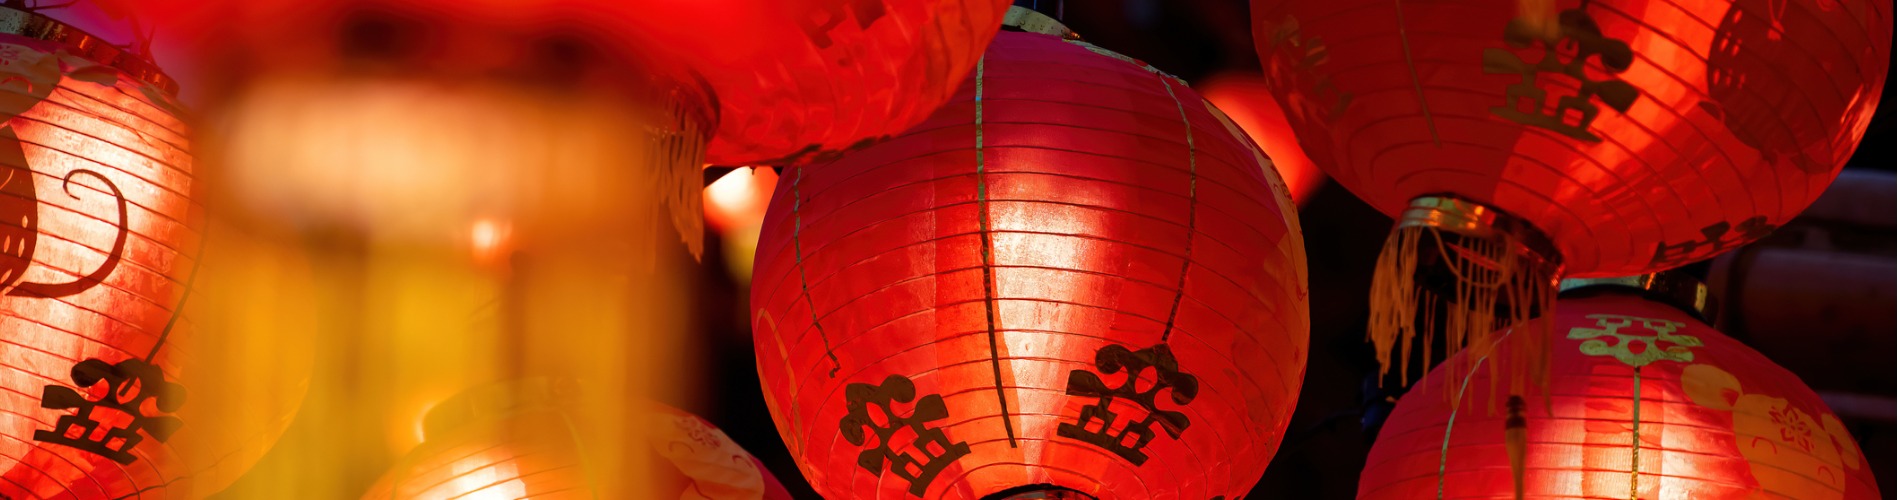 rows-of-colorful-glowing-red-chinese-lanterns 1900 x 500